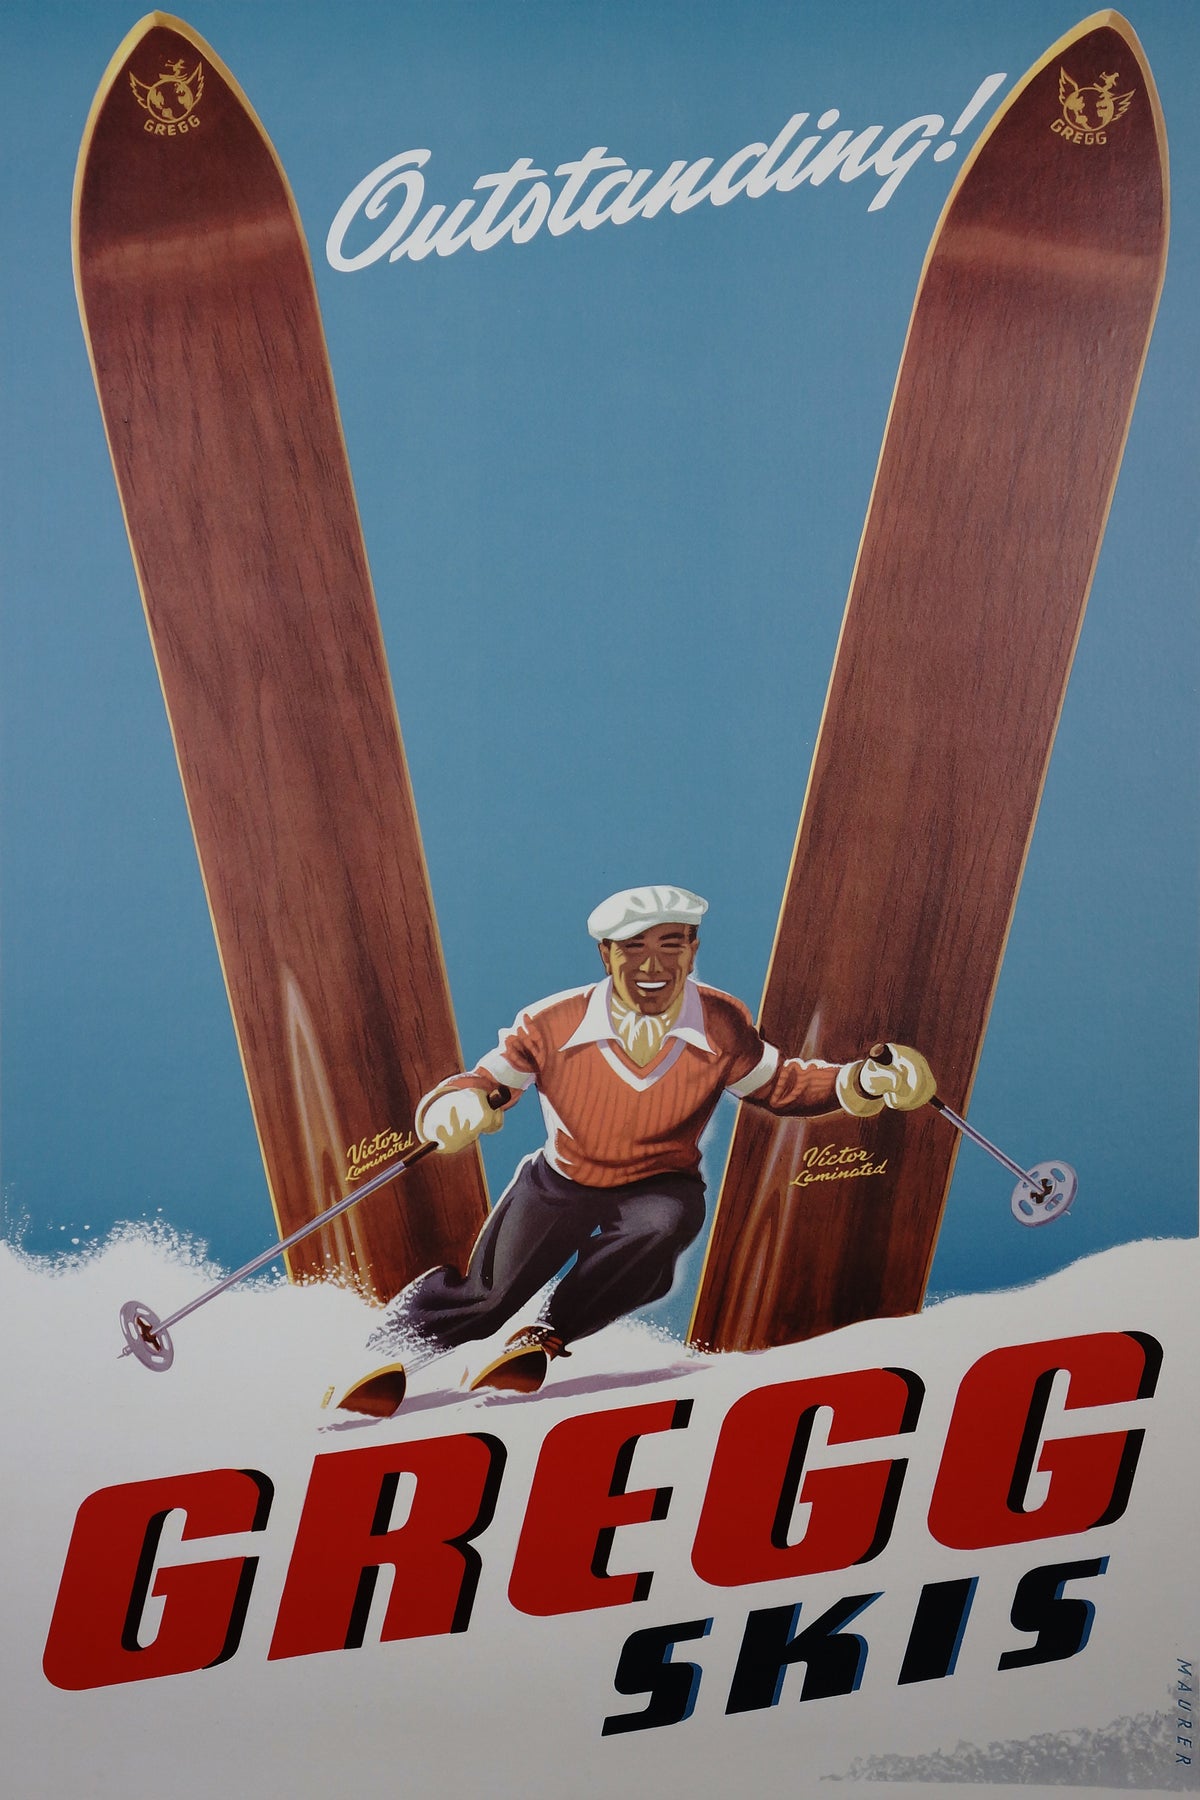 Gregg Skis - Authentic Vintage Poster